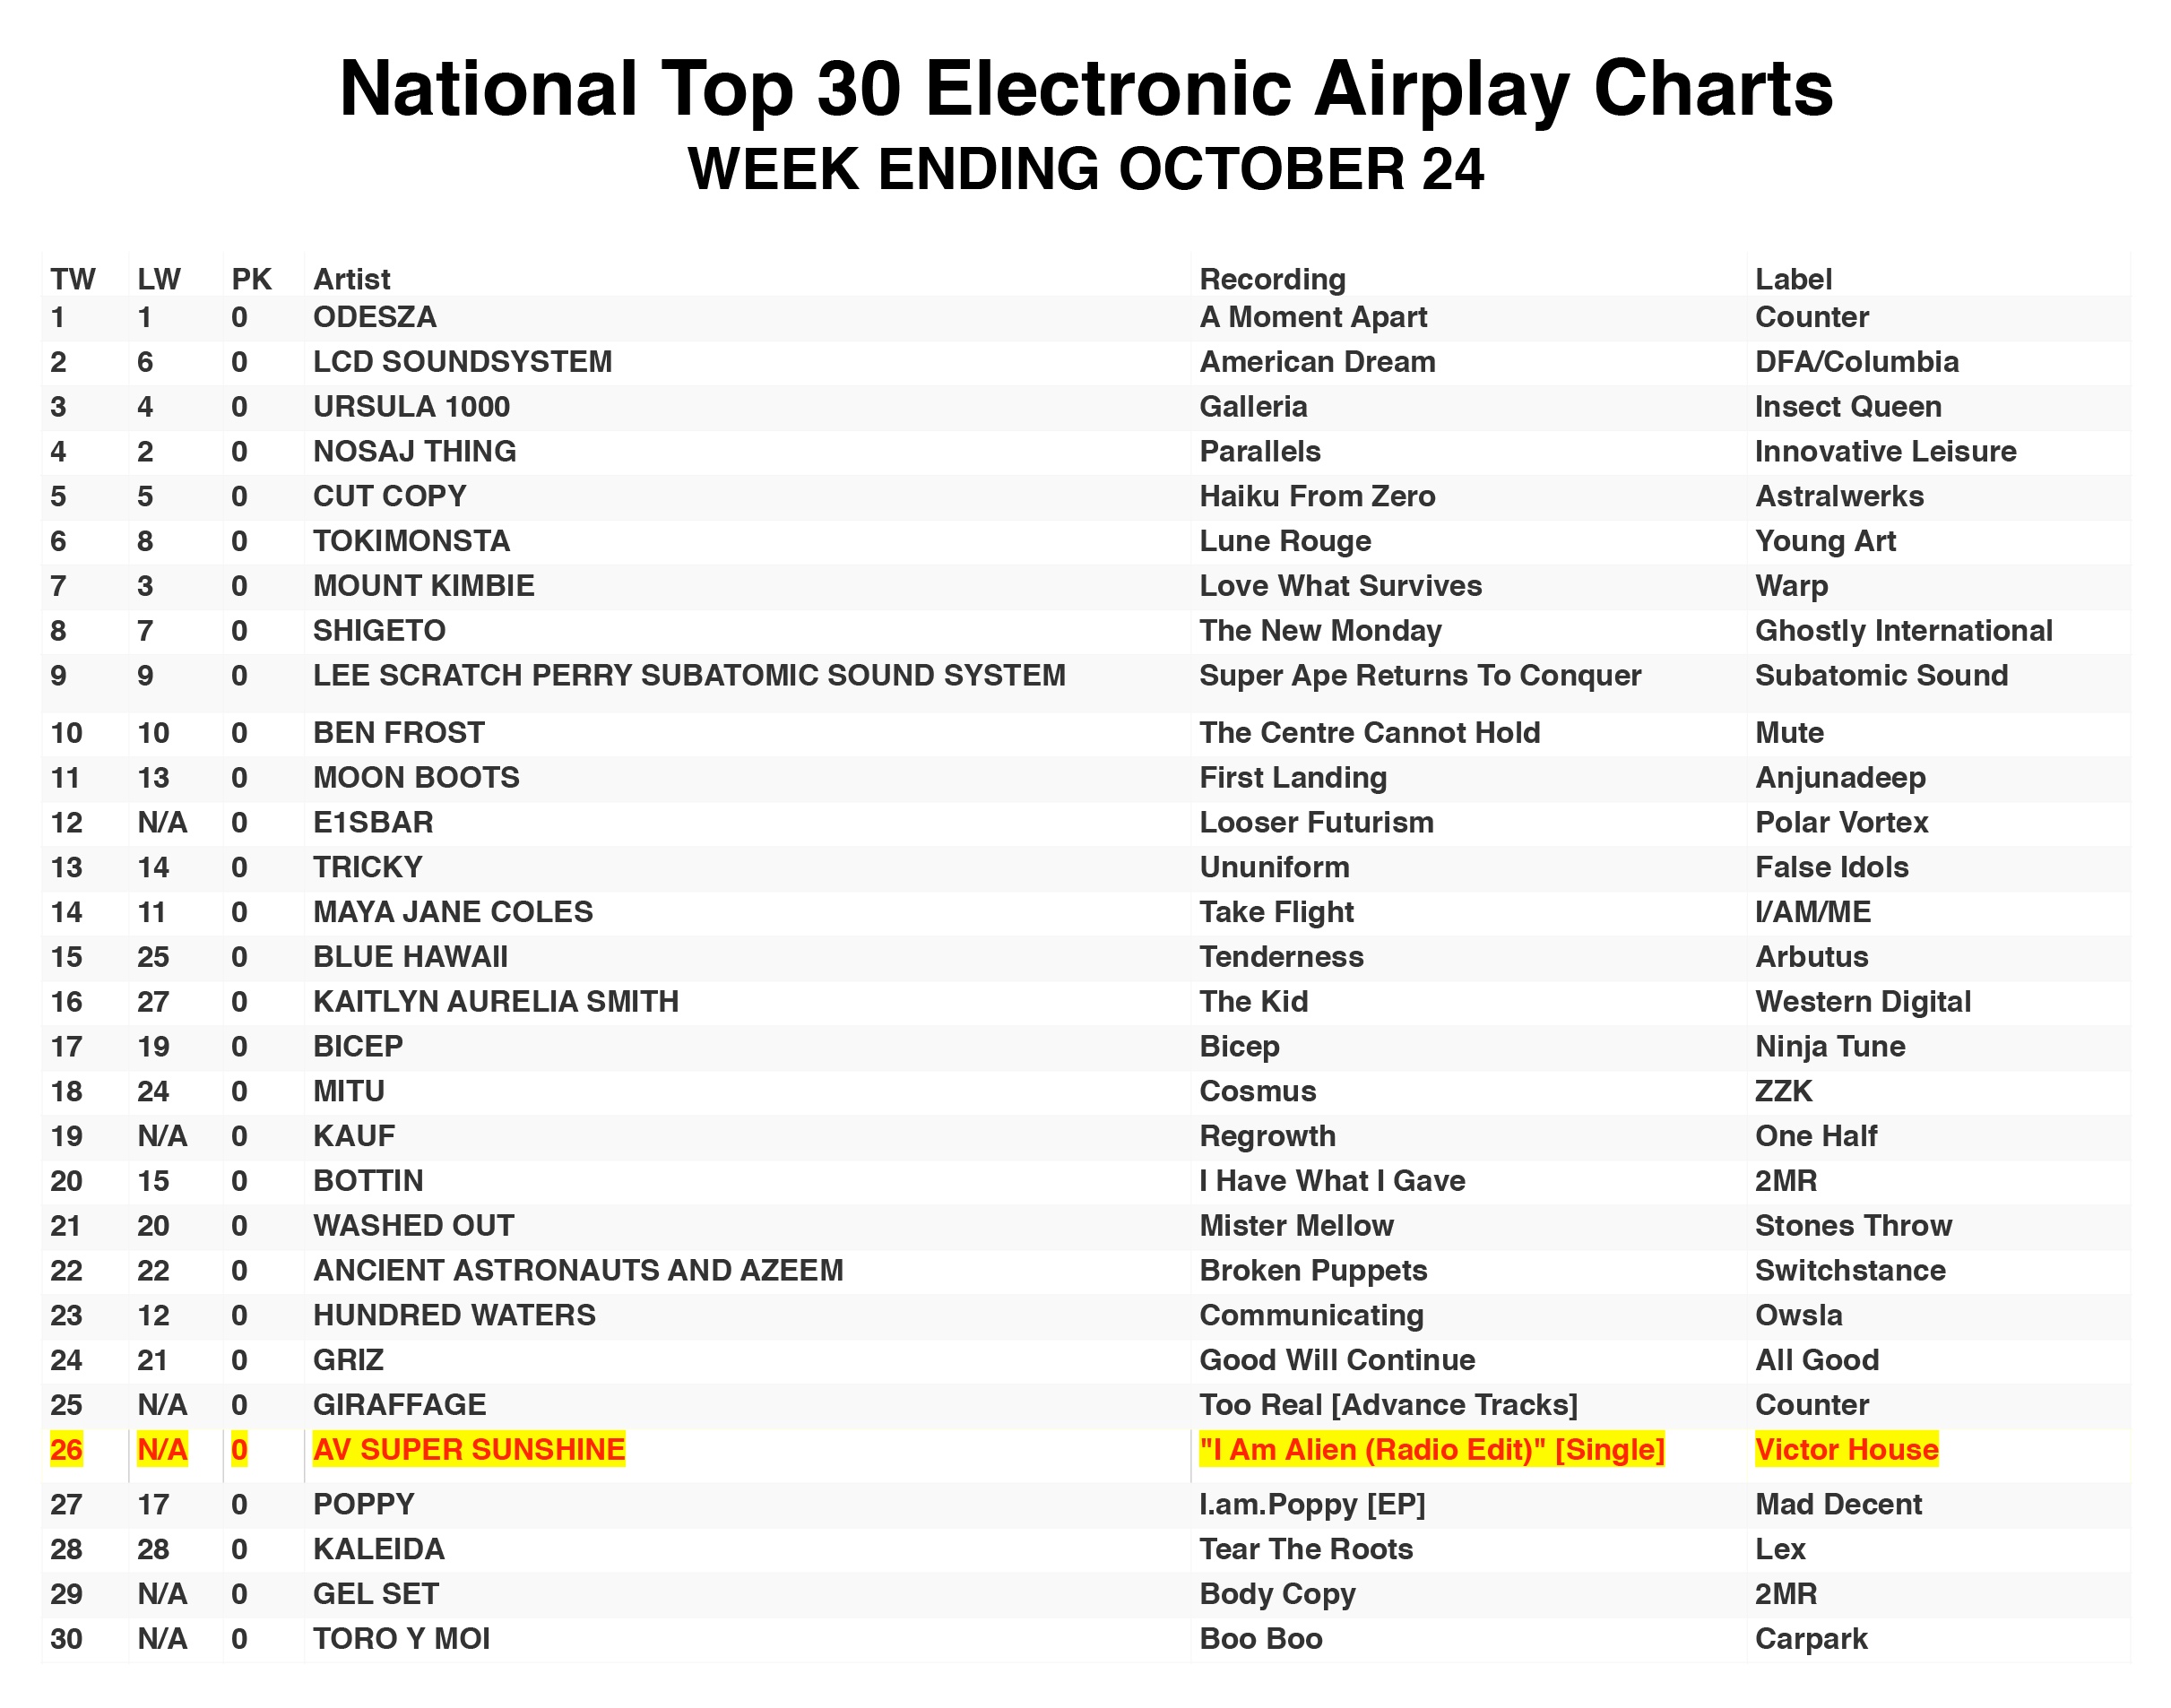 National-Top-30-Electronic-Airplay-Charts102417-resize